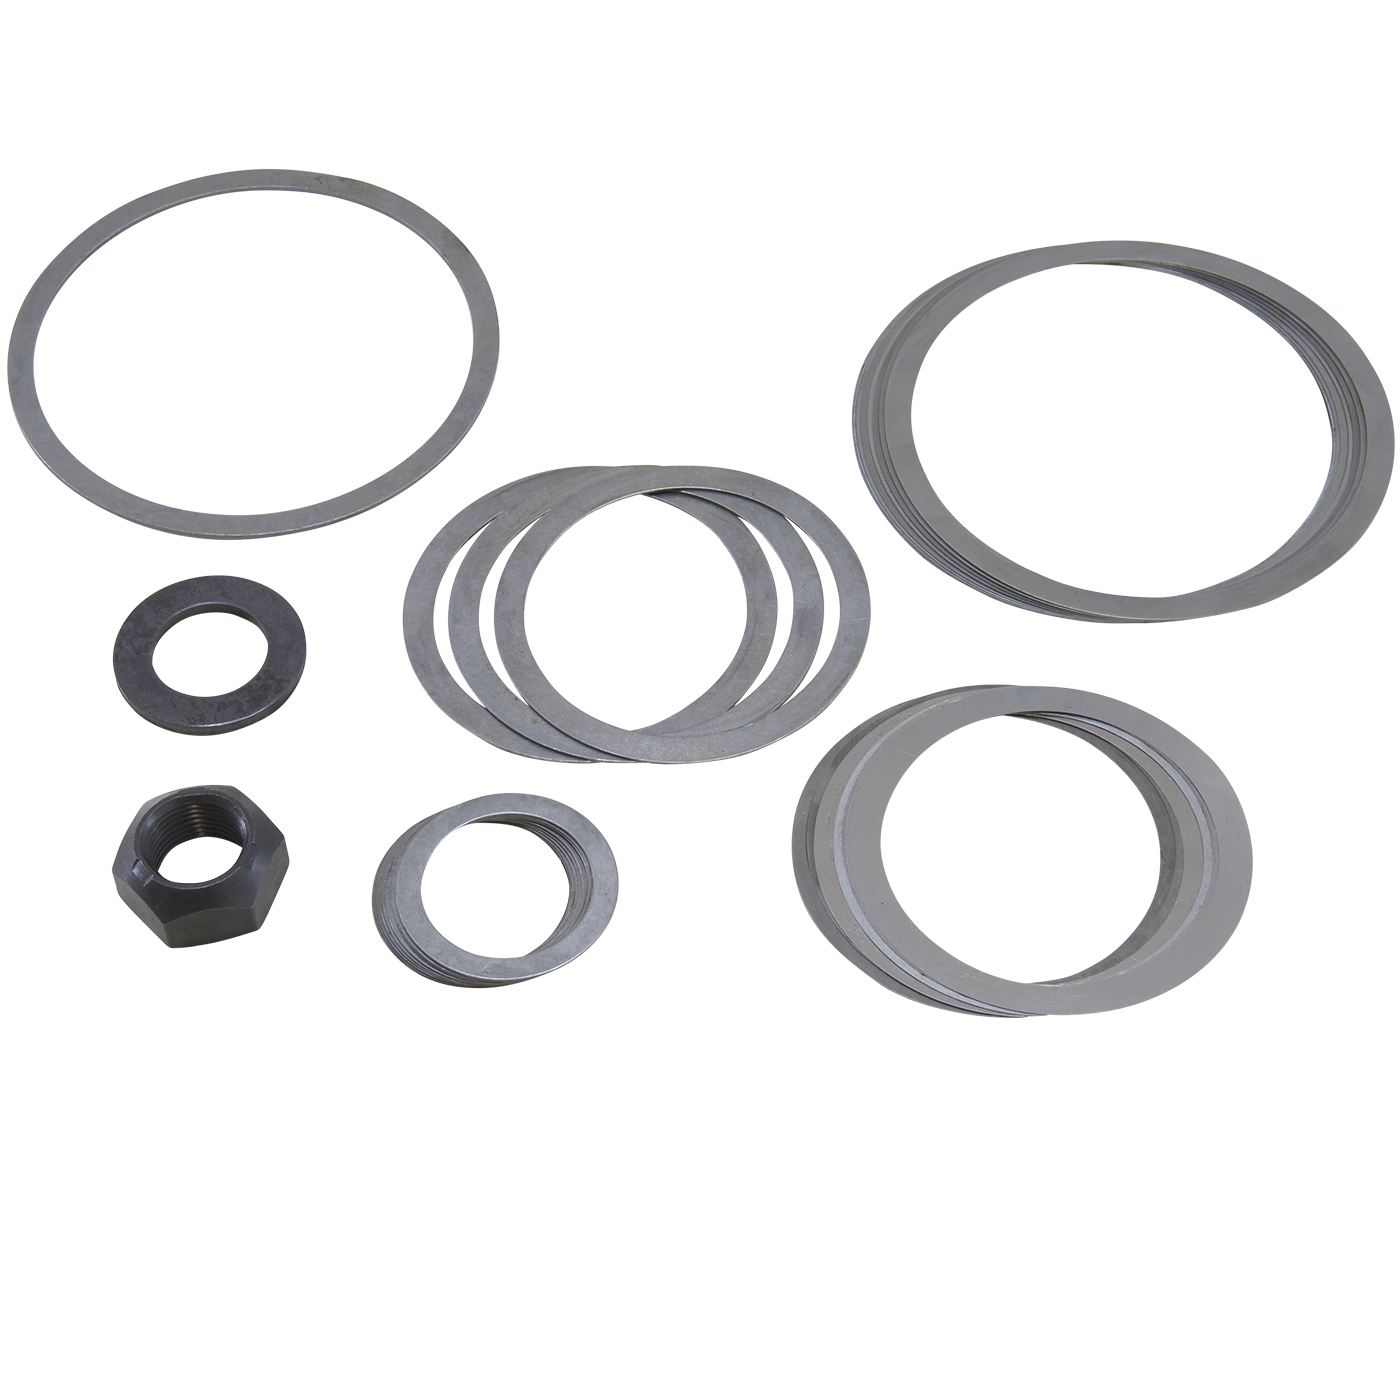 Replacement Carrier shim kit for Dana 70 & 70HD 